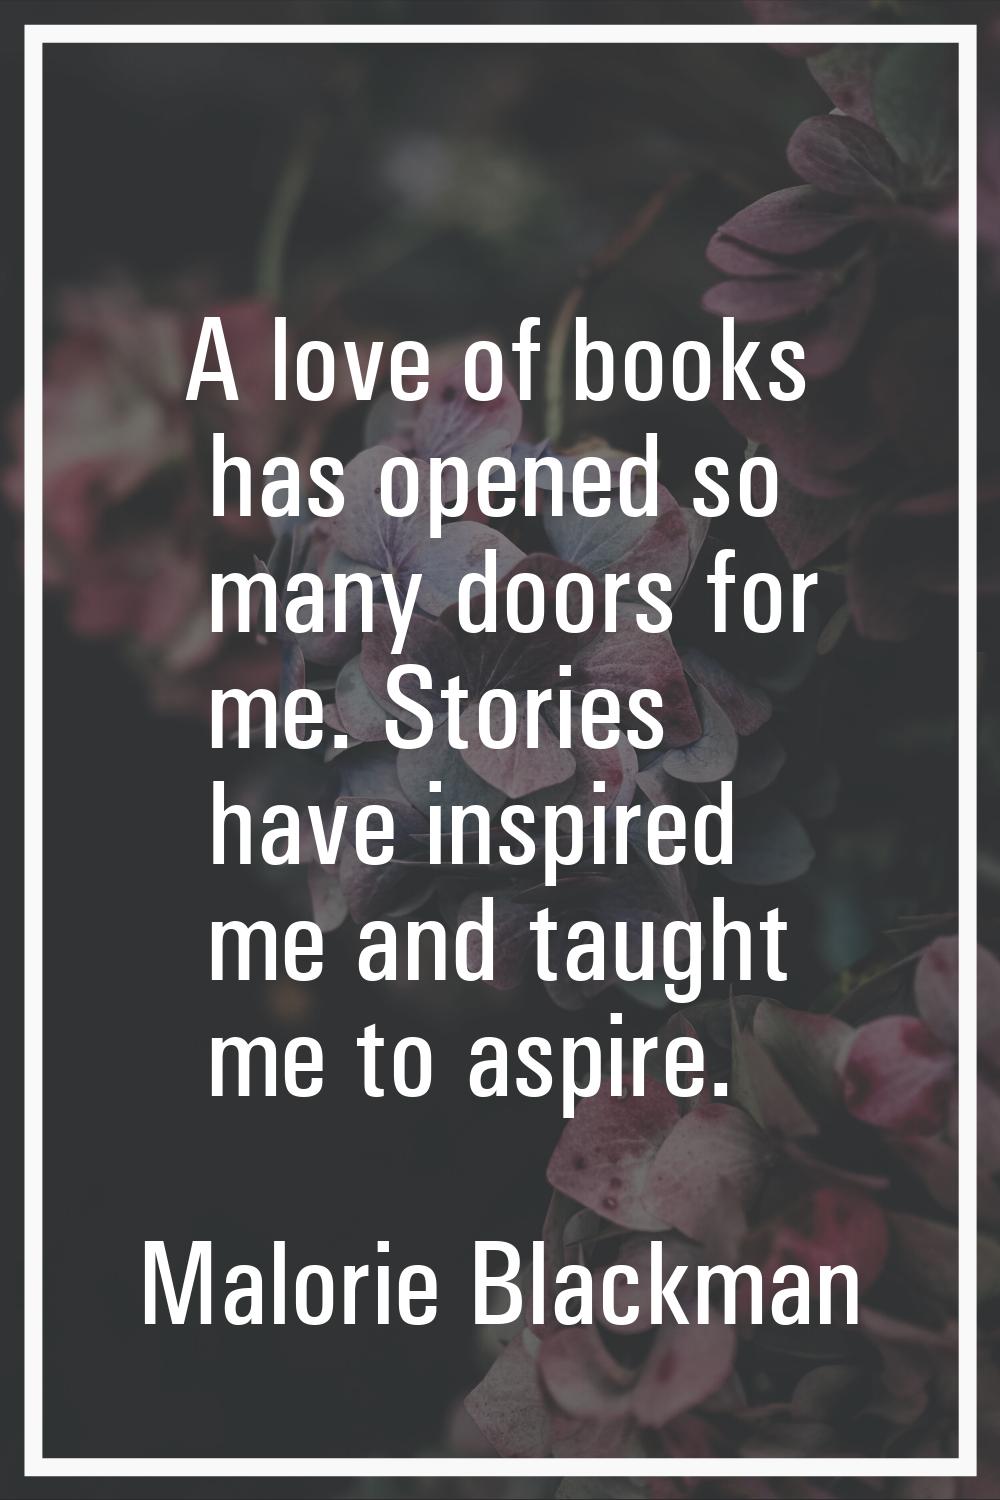 A love of books has opened so many doors for me. Stories have inspired me and taught me to aspire.